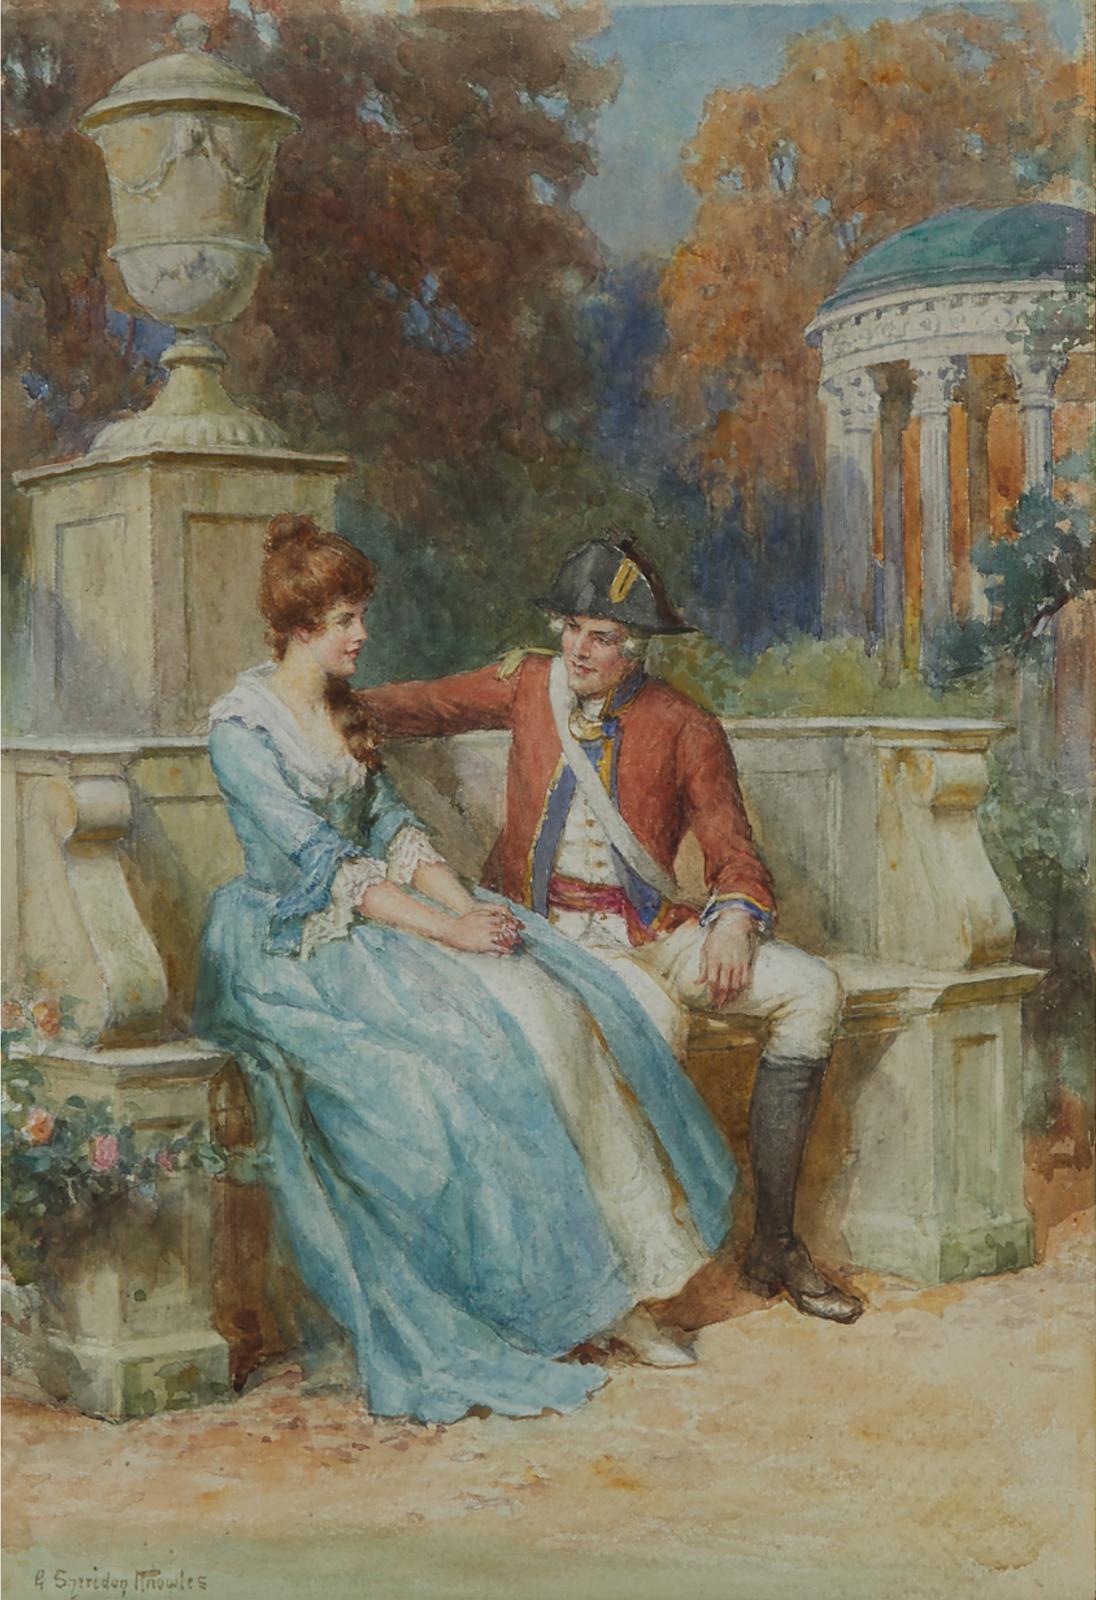 George Sheridan Knowles (1863-1931) - The Officer And A Lady In A Garden Courtyard